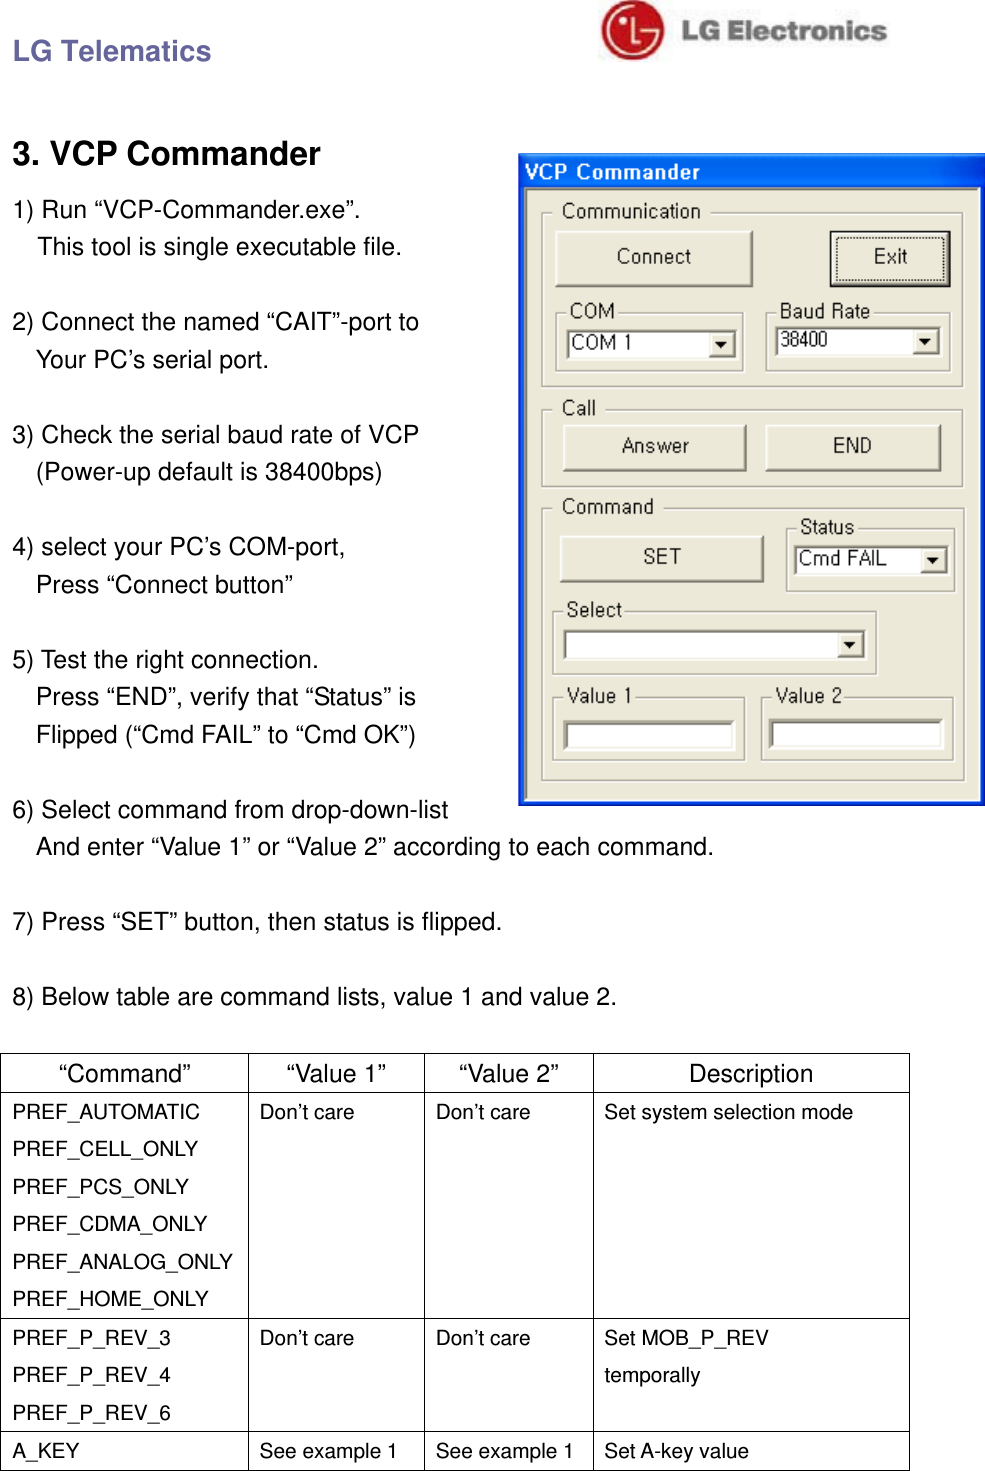 LG Telematics                               3. VCP Commander 1) Run “VCP-Commander.exe”.       This tool is single executable file.  2) Connect the named “CAIT”-port to   Your PC’s serial port.  3) Check the serial baud rate of VCP (Power-up default is 38400bps)  4) select your PC’s COM-port,   Press “Connect button”  5) Test the right connection.   Press “END”, verify that “Status” is Flipped (“Cmd FAIL” to “Cmd OK”)  6) Select command from drop-down-list And enter “Value 1” or “Value 2” according to each command.  7) Press “SET” button, then status is flipped.  8) Below table are command lists, value 1 and value 2.  “Command”  “Value 1”  “Value 2”  Description PREF_AUTOMATIC PREF_CELL_ONLY PREF_PCS_ONLY PREF_CDMA_ONLY PREF_ANALOG_ONLY PREF_HOME_ONLY Don’t care  Don’t care  Set system selection mode PREF_P_REV_3 PREF_P_REV_4 PREF_P_REV_6 Don’t care  Don’t care  Set MOB_P_REV temporally A_KEY  See example 1  See example 1 Set A-key value 